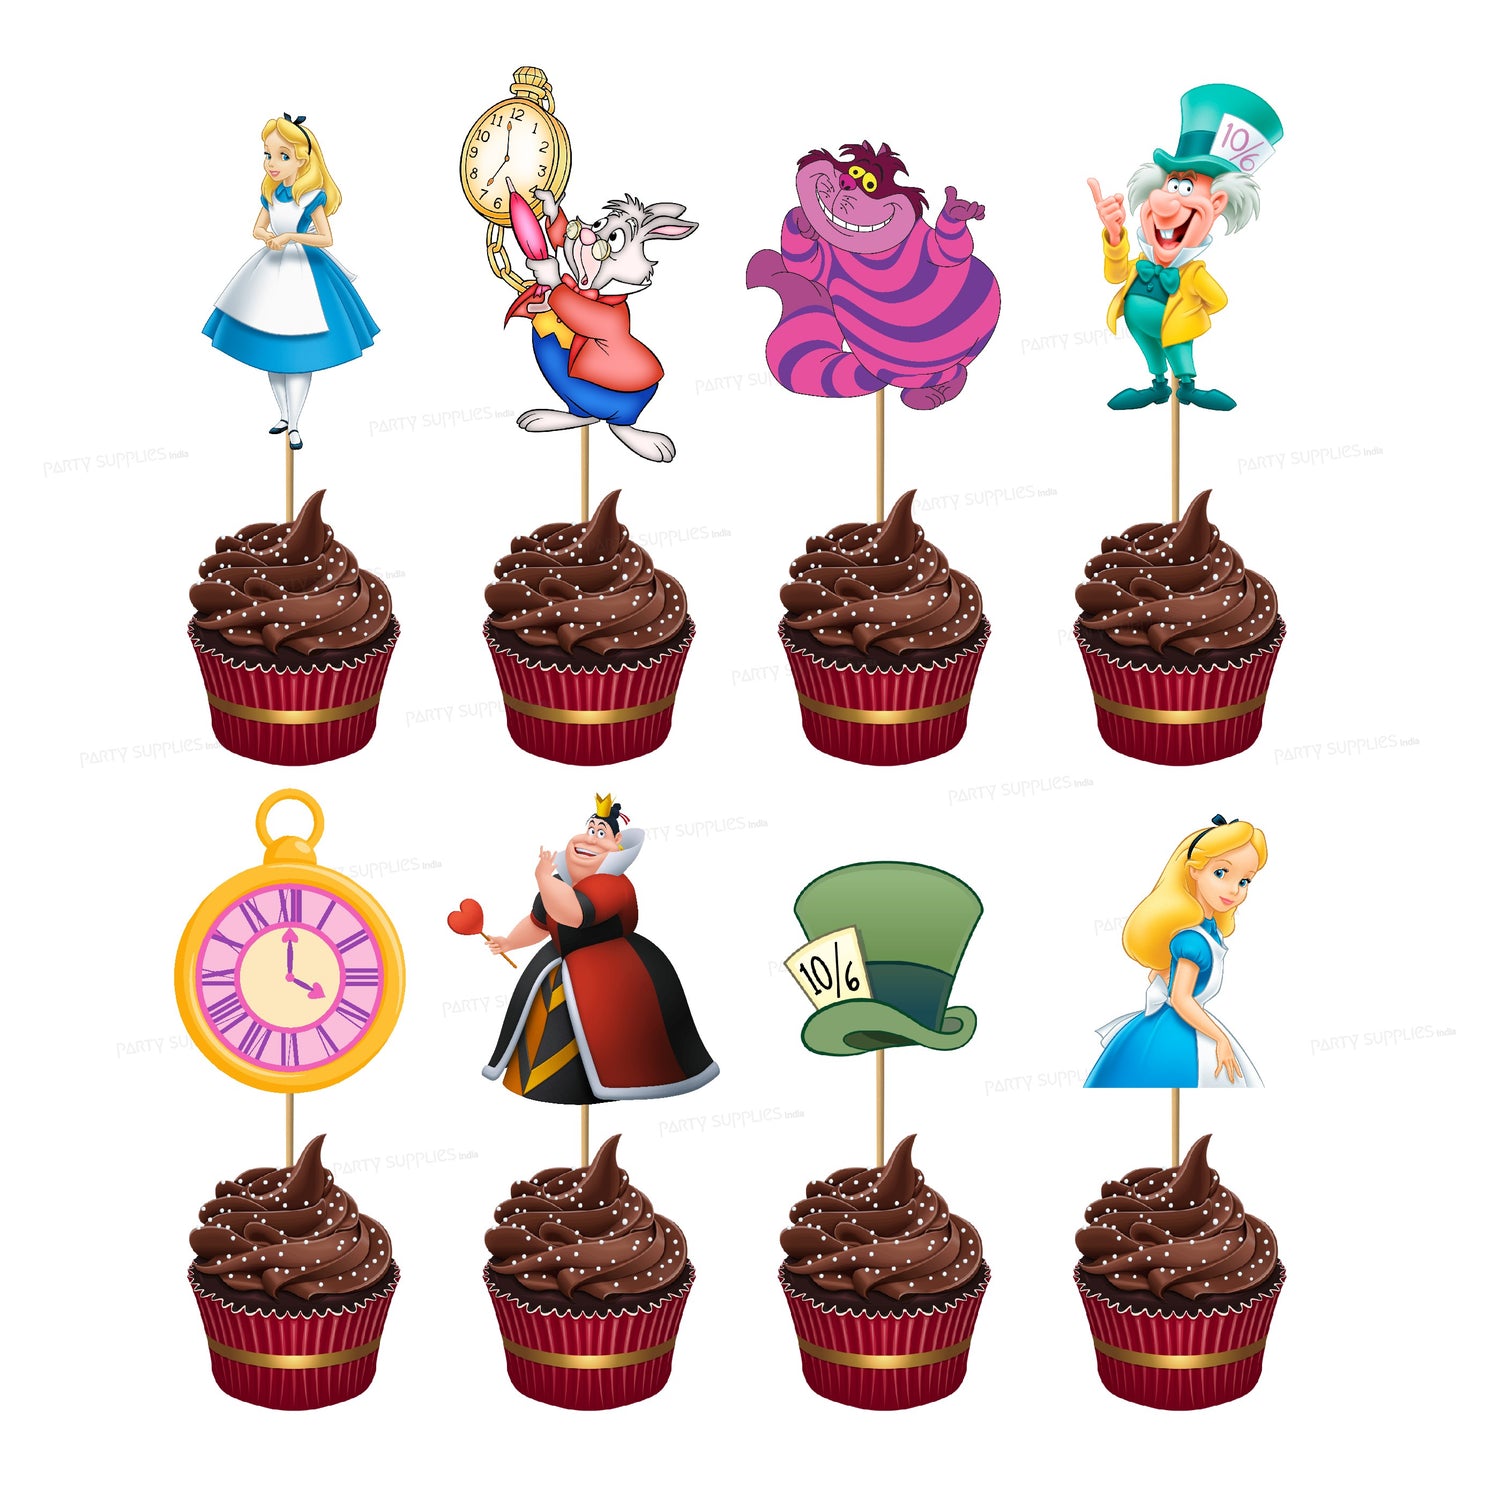 PSI Alice in Wonderland Customized cup cake topper